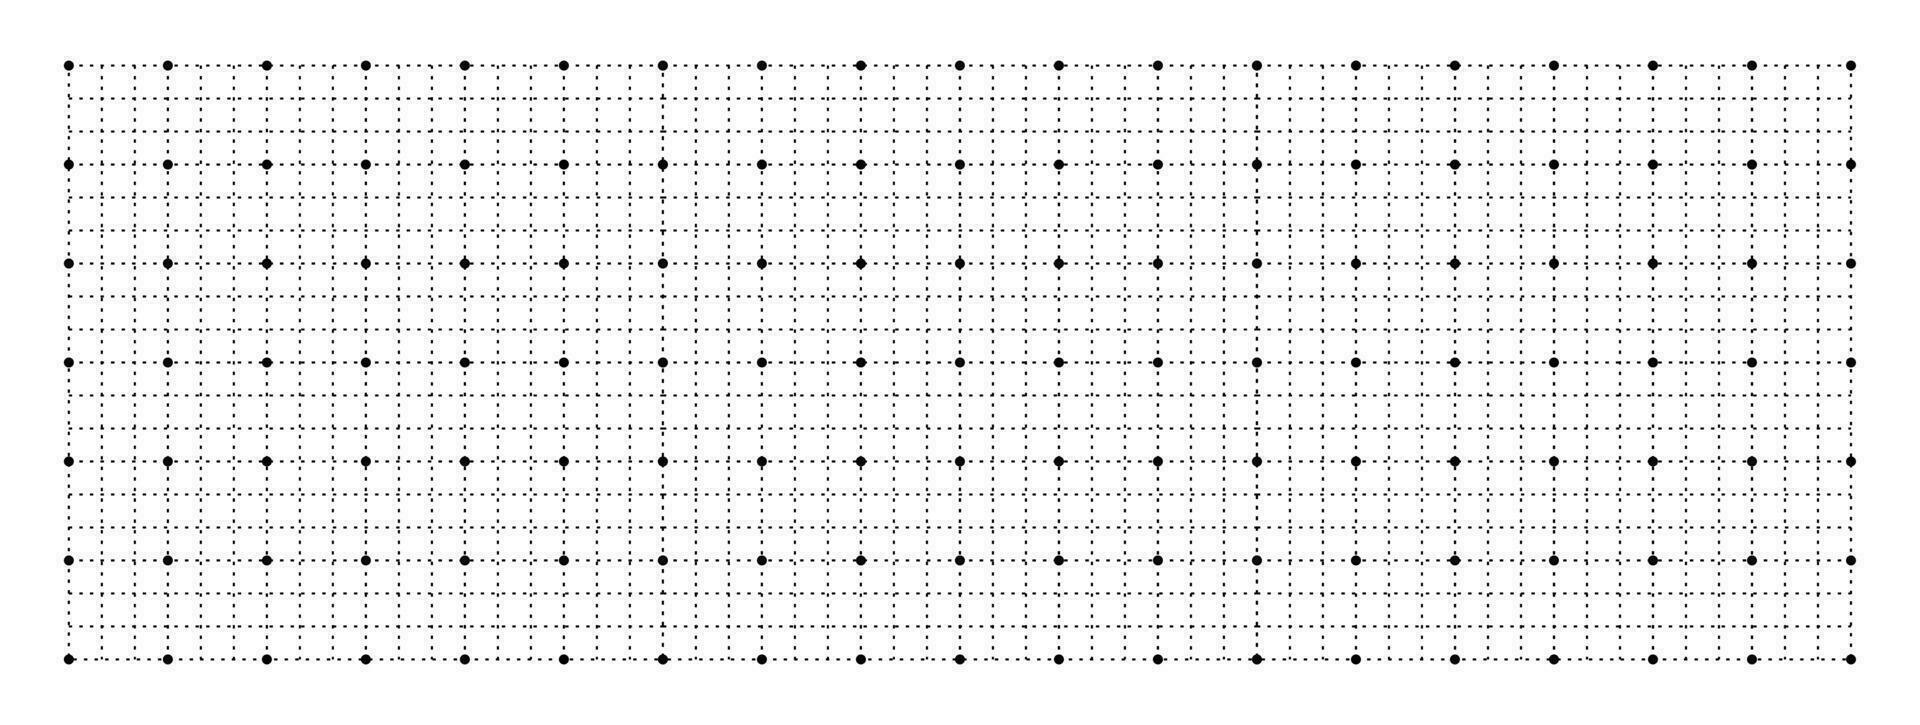 Geometric grid with squares background. Graphic blank white template with black lines for drafting and technical design with millimeter vector markings